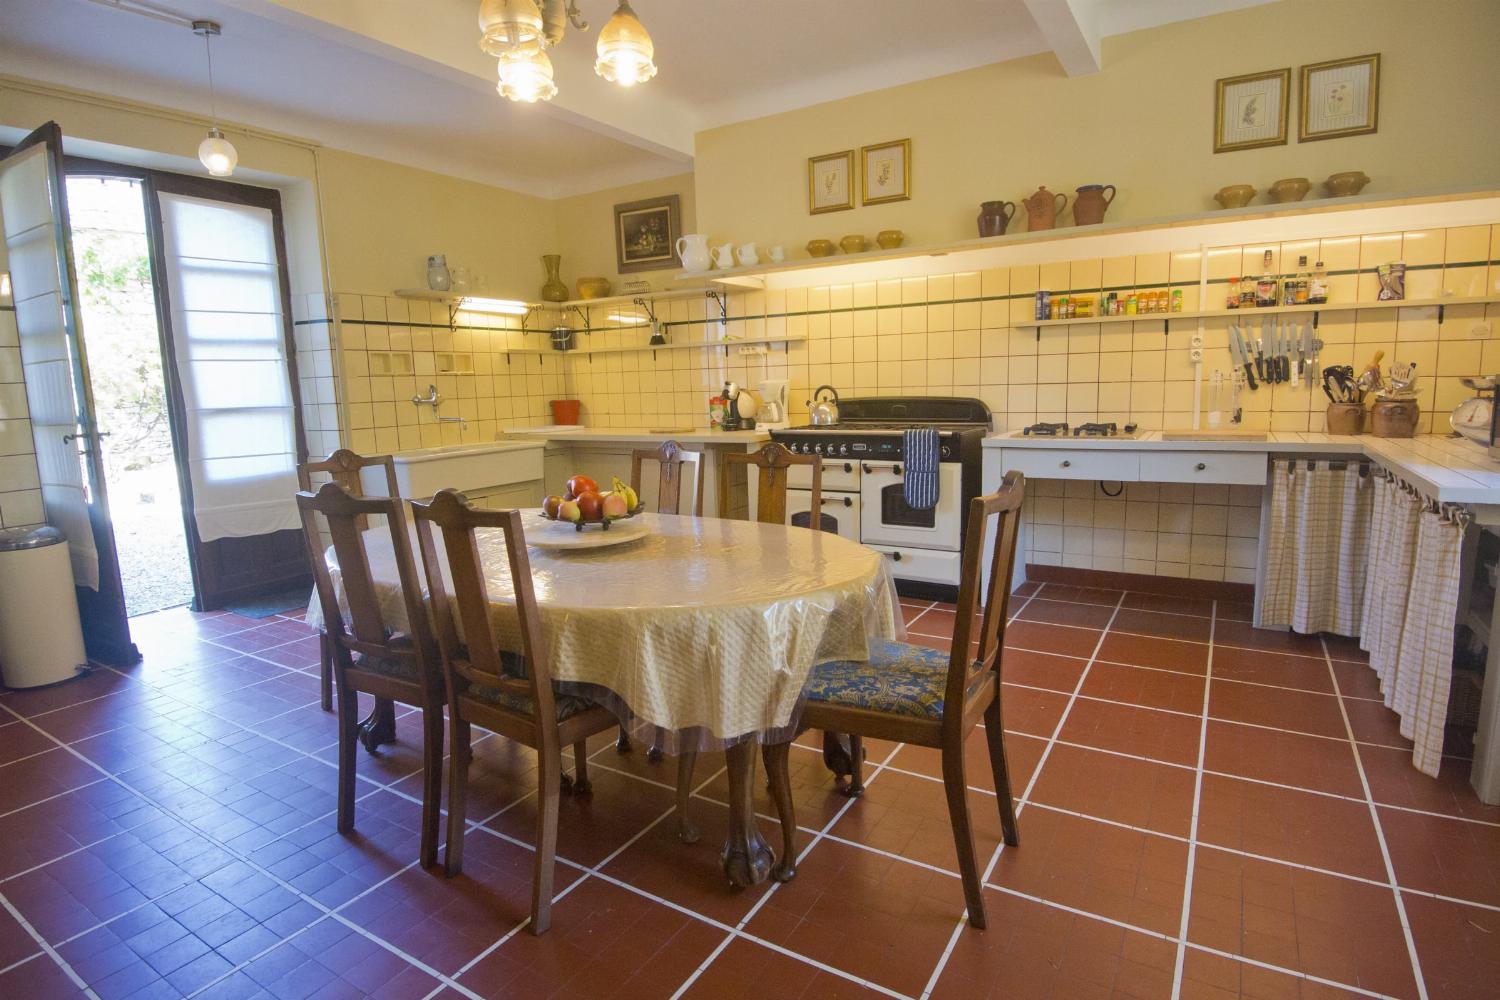 Kitchen | Rental home in Nouvelle-Aquitaine